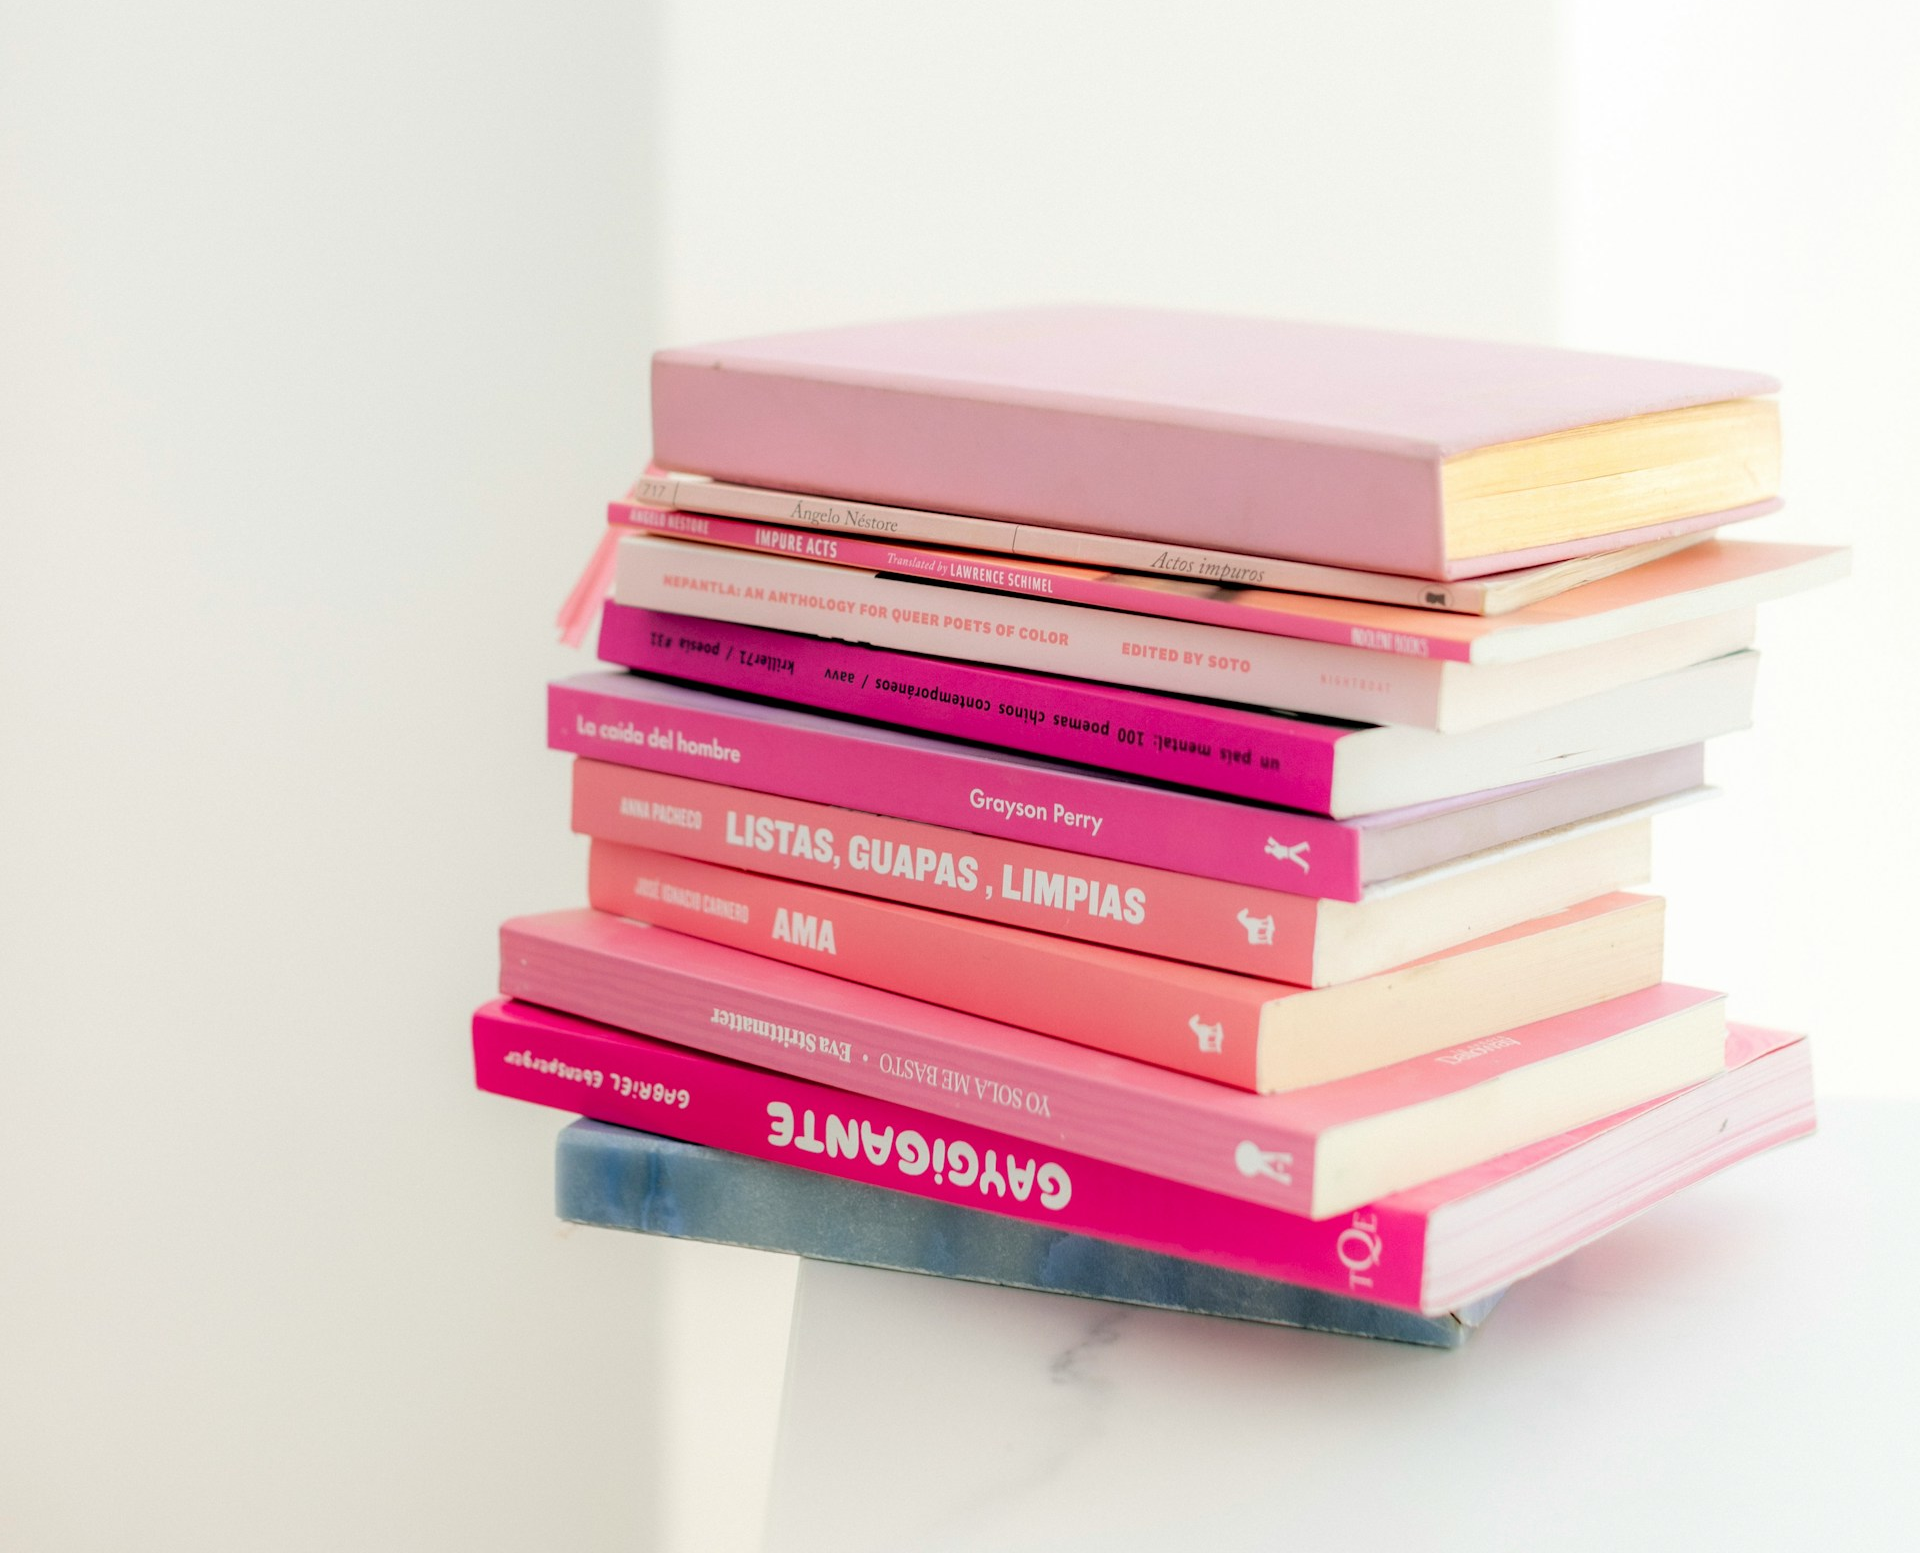 A pile of English grammar books of pink shades.